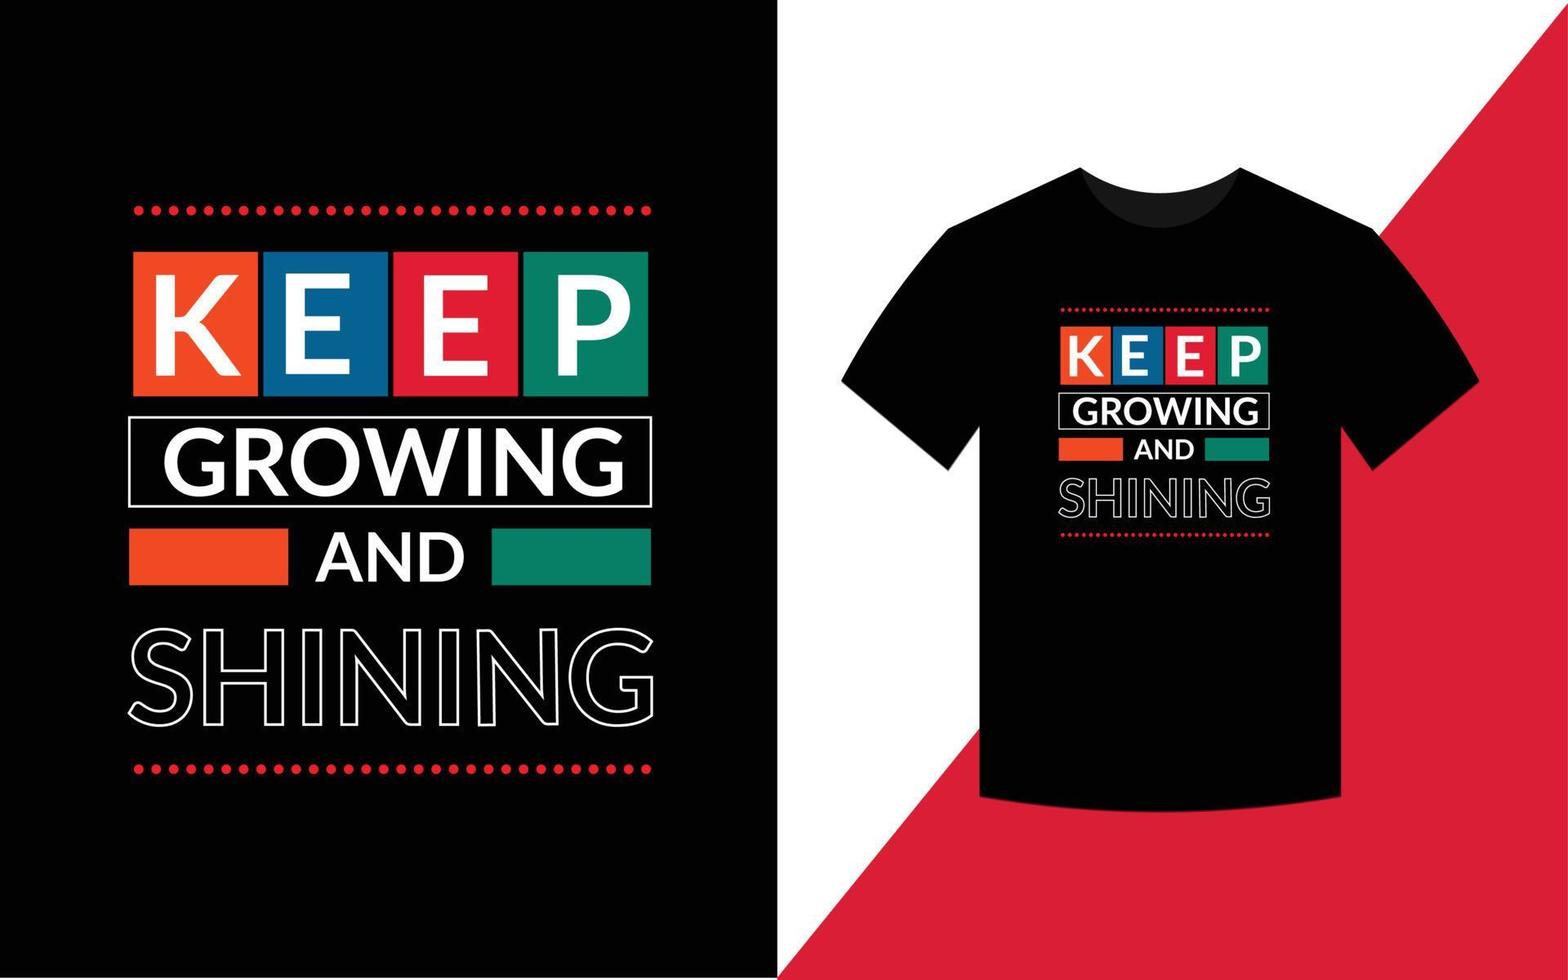 Keep growing and shining modern motivational quotes t shirt design template vector